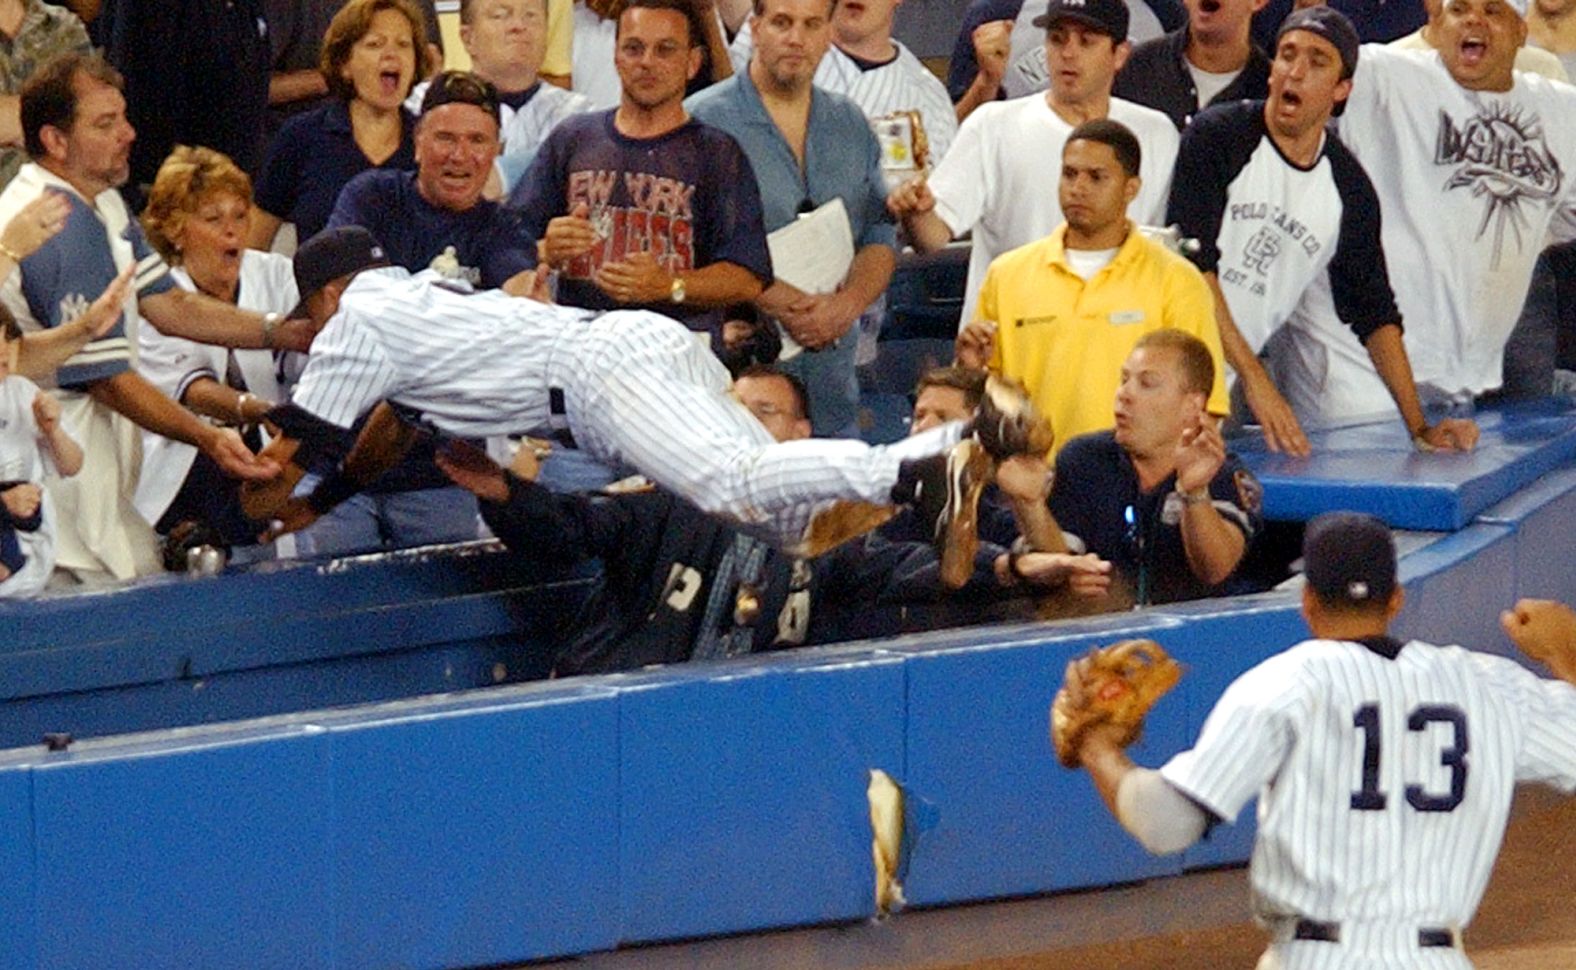 Jeter dives into the stands at Yankee Stadium to catch a foul ball in July 2004.